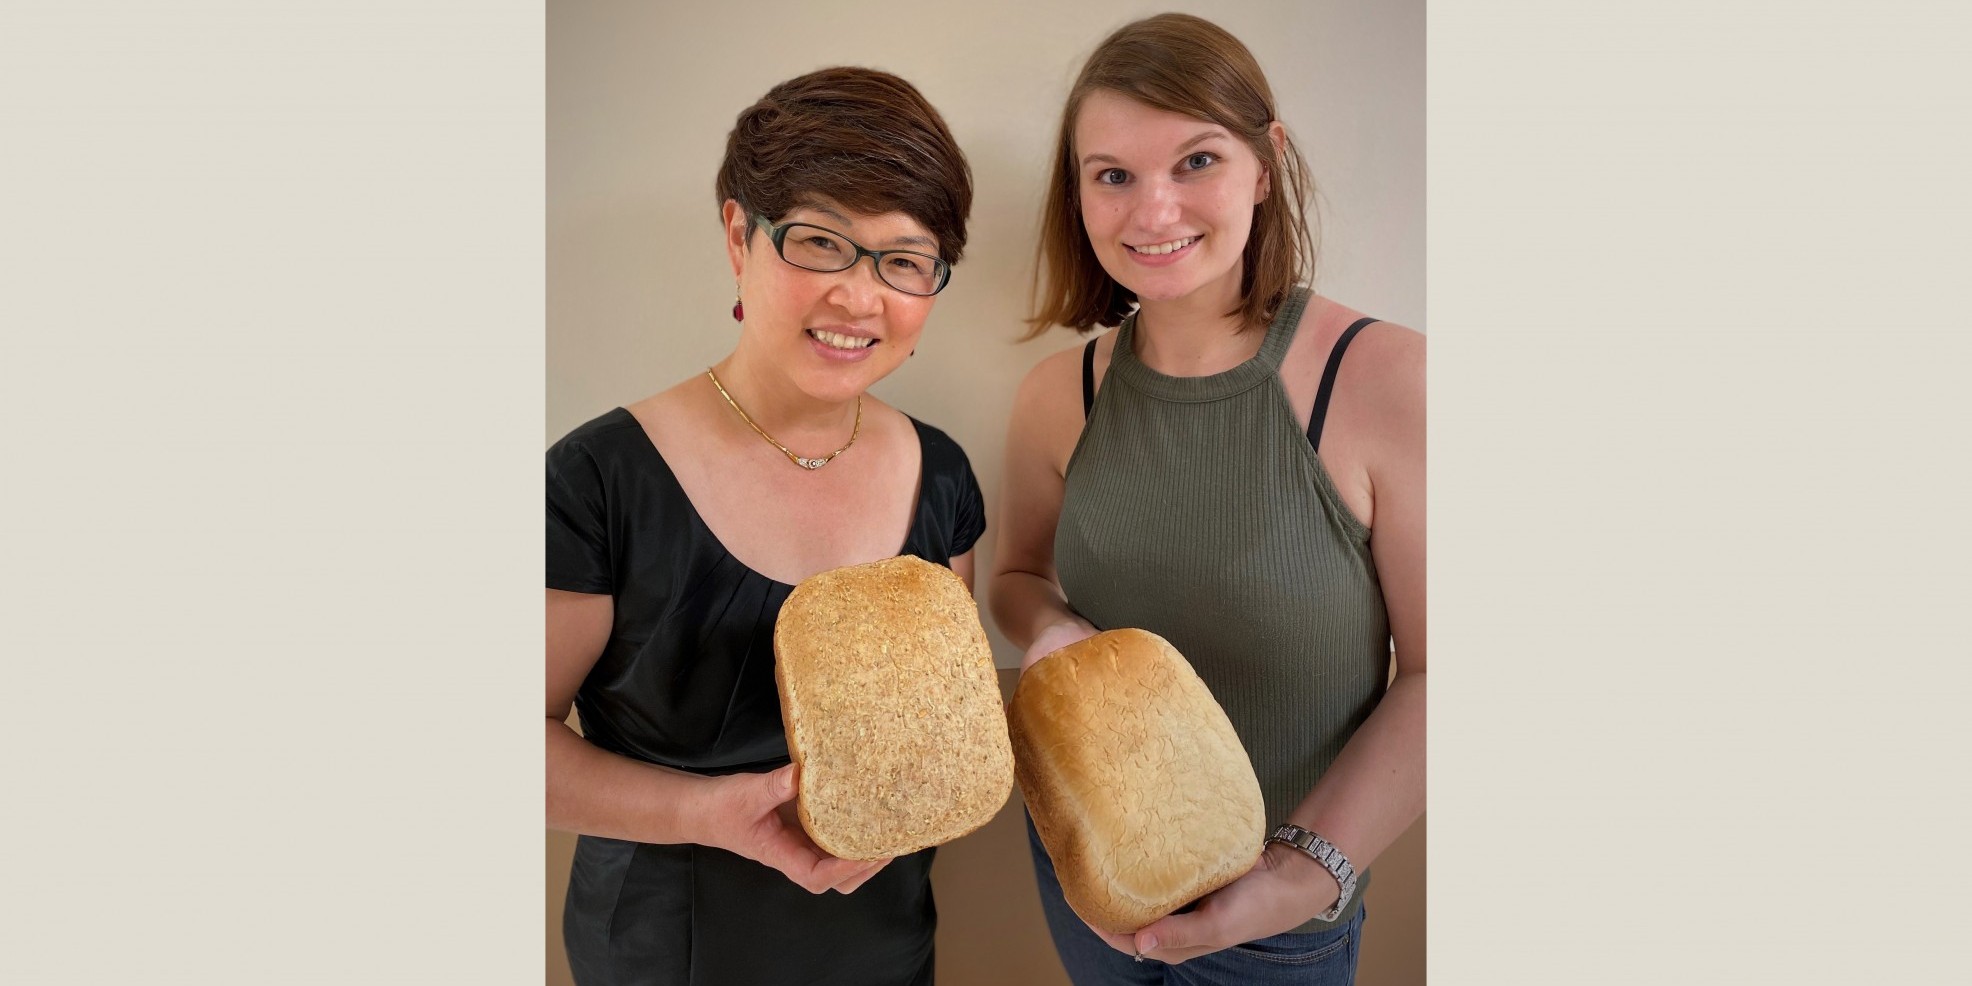 In a new study, food science professor Soo-Yeun Lee (left) and graduate student Aubrey Dunteman explore ways to reduce sodium in bread without sacrificing taste and functionality.